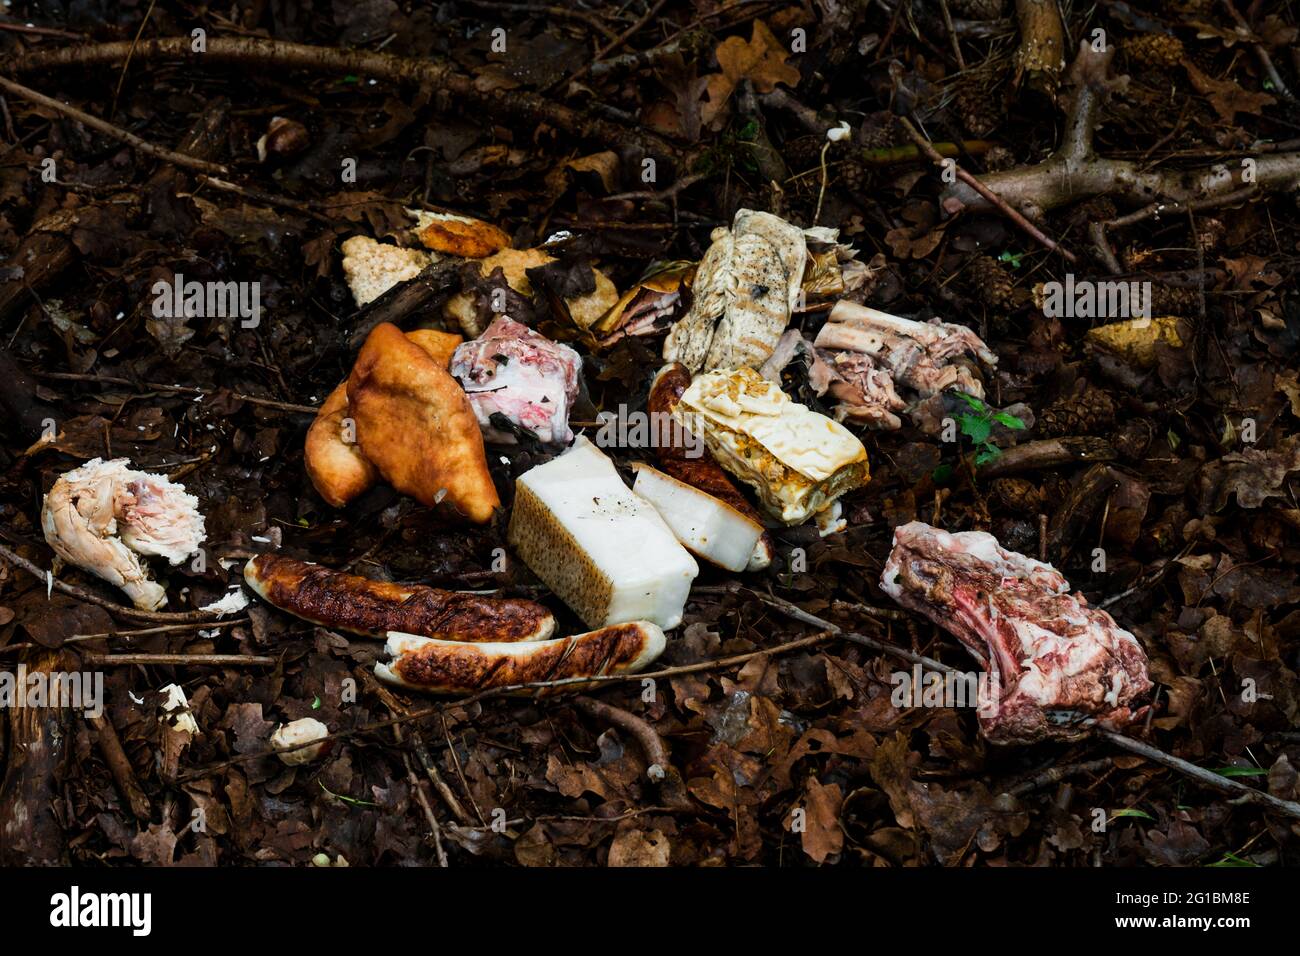 rotten food thrown in the woods Stock Photo